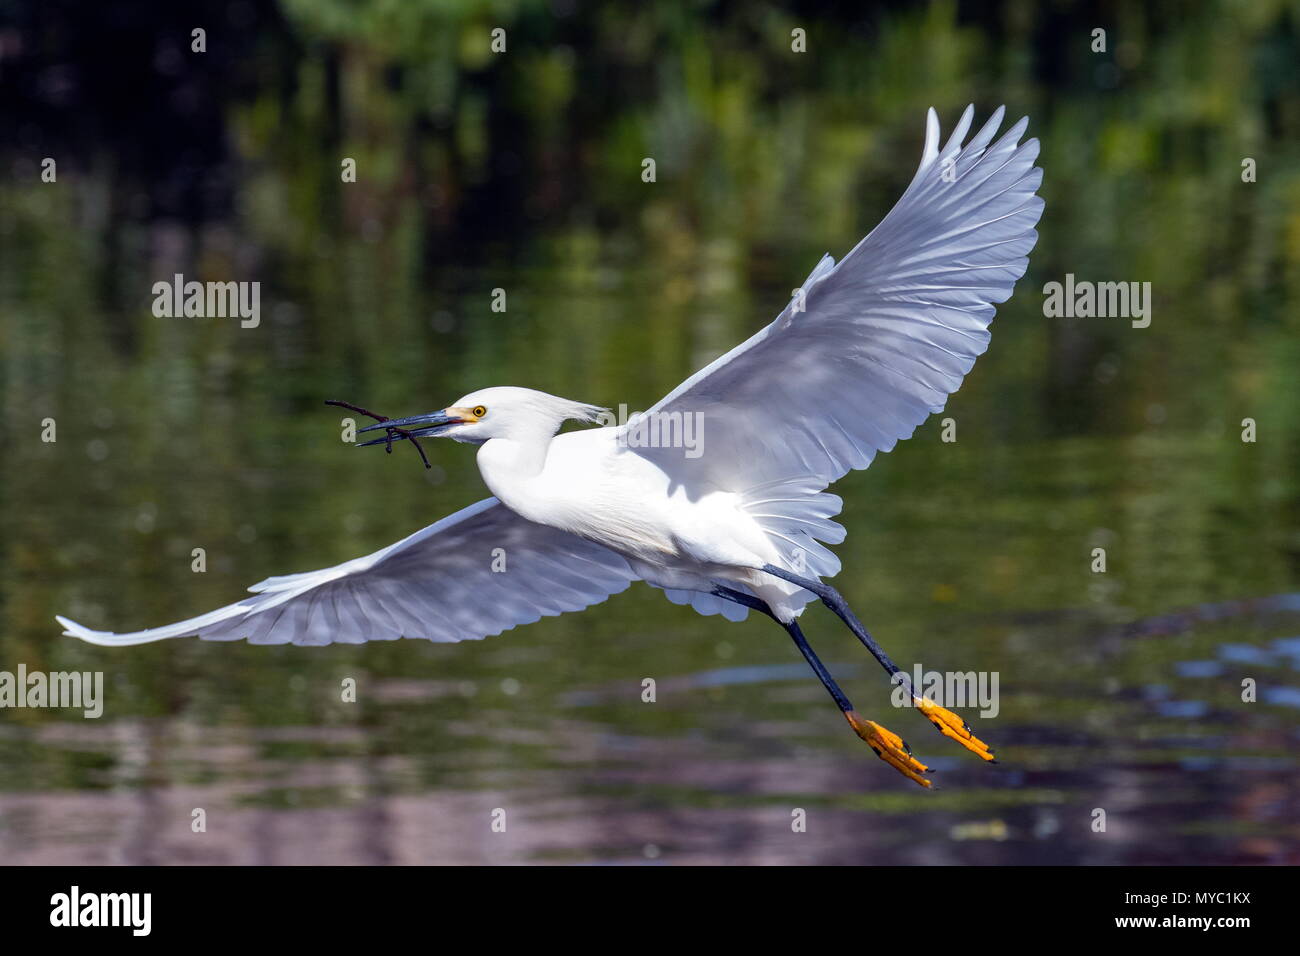 A Snowy egret, Egretta thula, carries nesting material at a rookery. Stock Photo